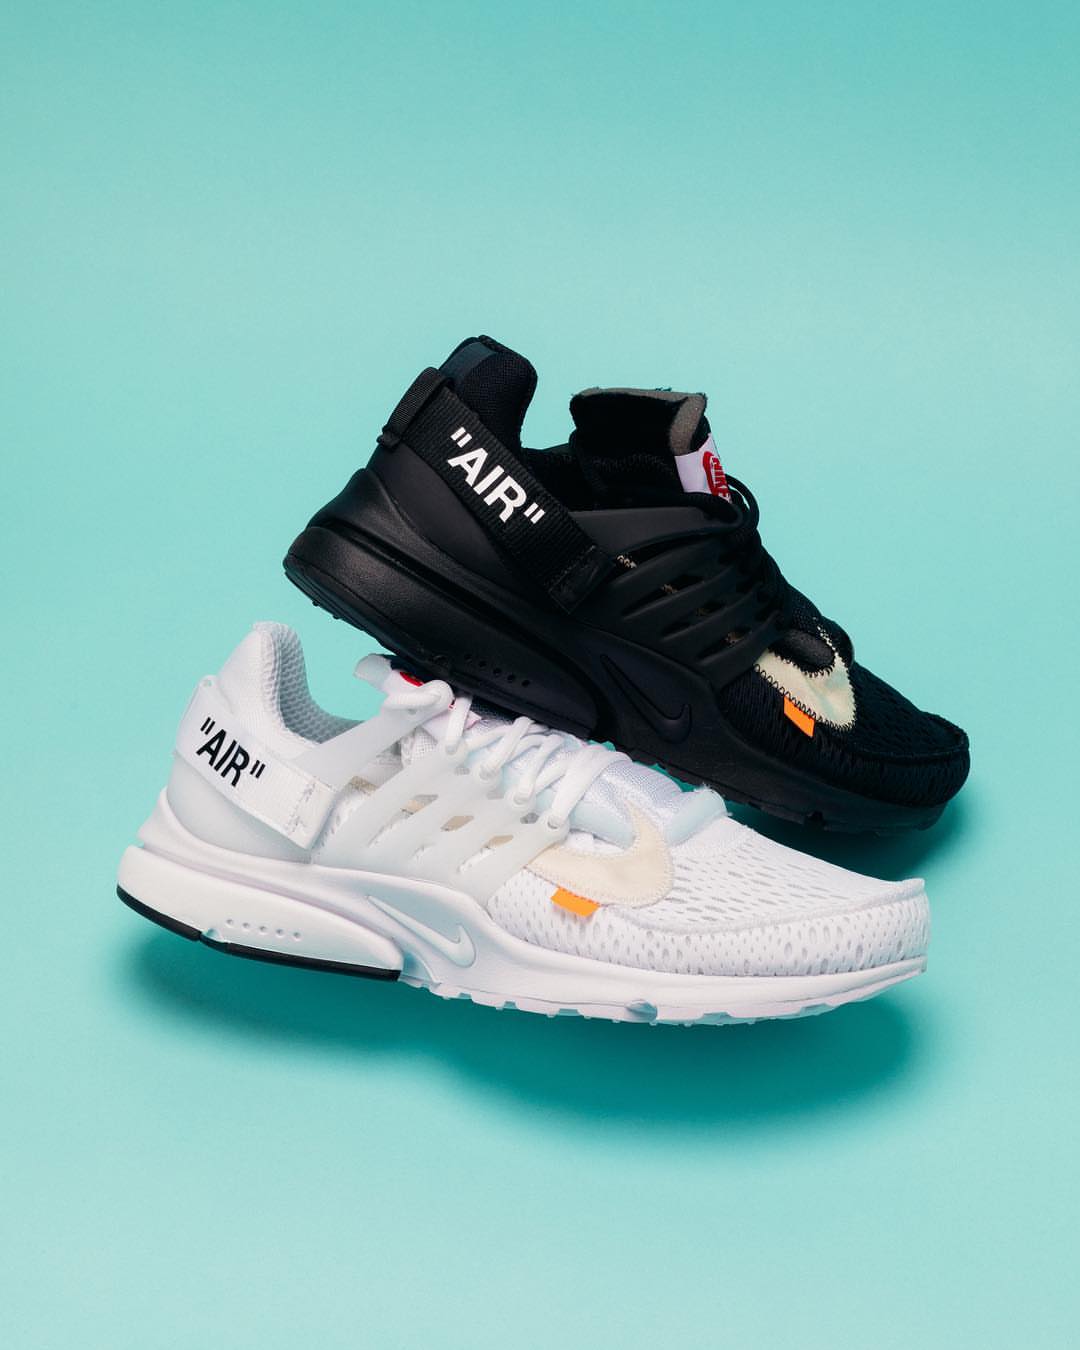 Autonomi solid dyd The Off-White x Nike Air Presto: How Will It Sell - StockX News